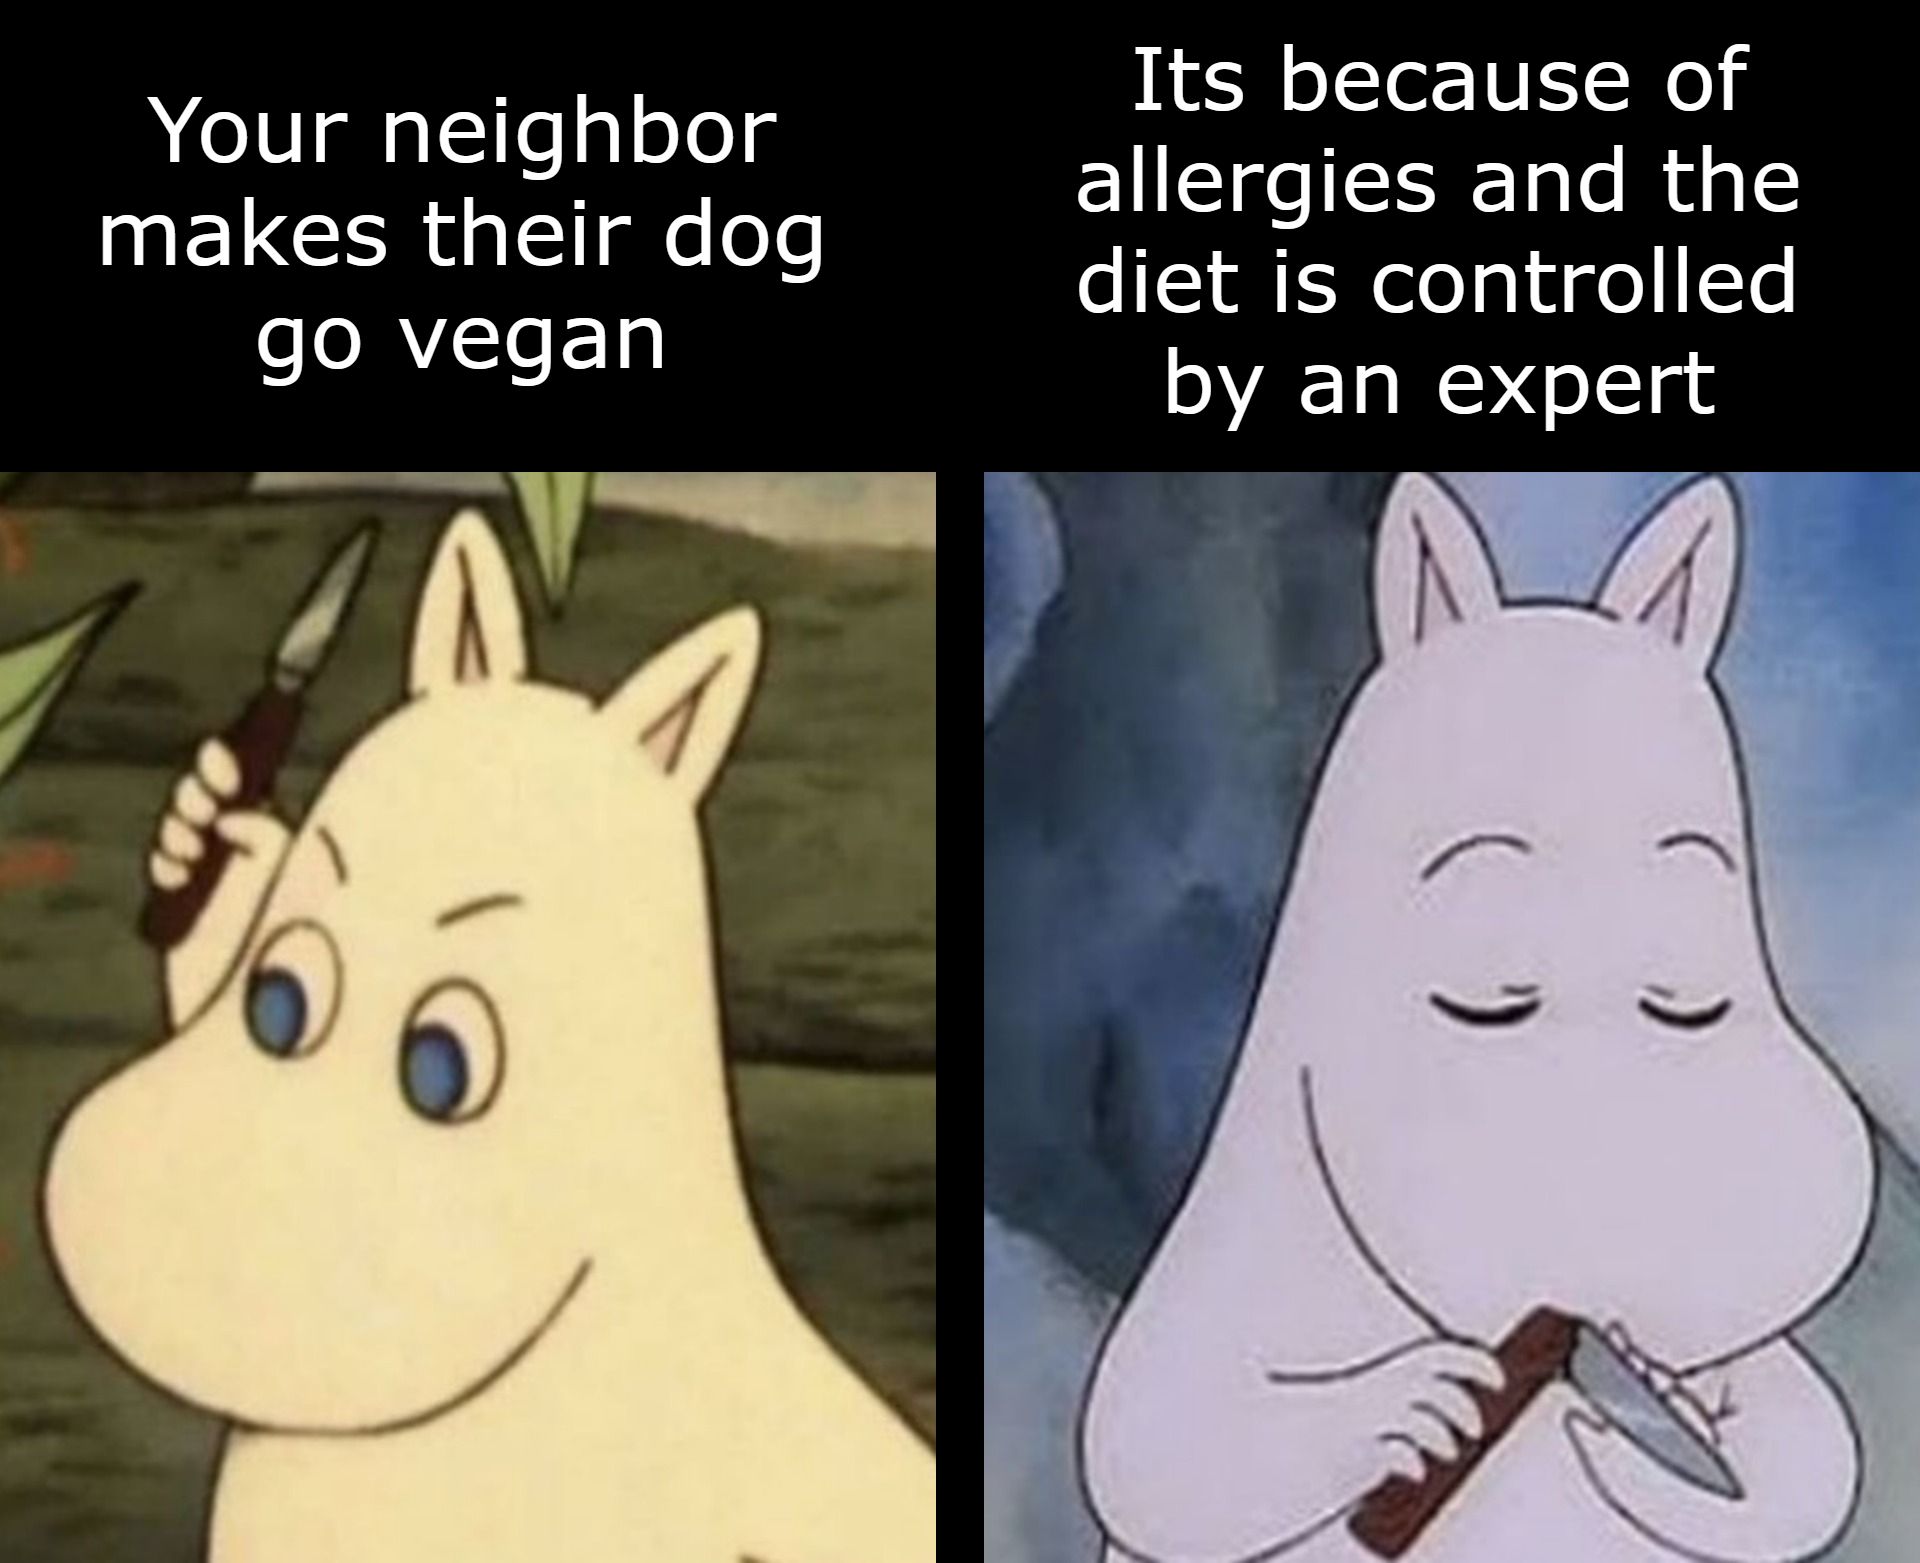 But most of the time, having your dog be vegan is bad.